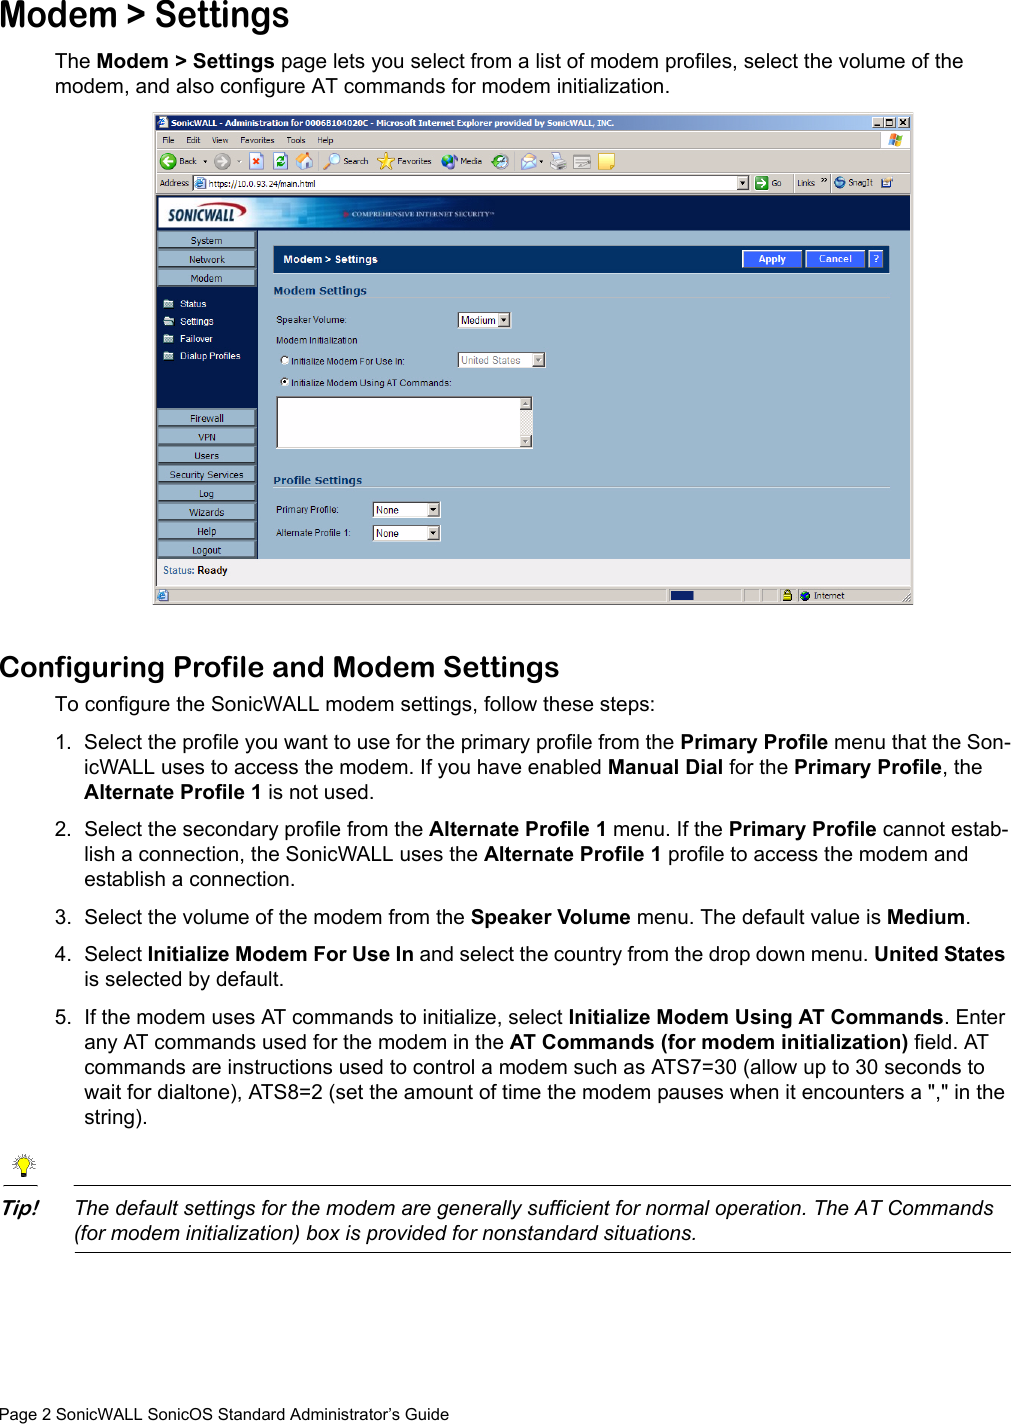 Page 2 SonicWALL SonicOS Standard Administrator’s GuideModem &gt; SettingsThe Modem &gt; Settings page lets you select from a list of modem profiles, select the volume of the modem, and also configure AT commands for modem initialization.Configuring Profile and Modem SettingsTo configure the SonicWALL modem settings, follow these steps:1. Select the profile you want to use for the primary profile from the Primary Profile menu that the Son-icWALL uses to access the modem. If you have enabled Manual Dial for the Primary Profile, the Alternate Profile 1 is not used. 2. Select the secondary profile from the Alternate Profile 1 menu. If the Primary Profile cannot estab-lish a connection, the SonicWALL uses the Alternate Profile 1 profile to access the modem and establish a connection. 3. Select the volume of the modem from the Speaker Volume menu. The default value is Medium. 4. Select Initialize Modem For Use In and select the country from the drop down menu. United States is selected by default. 5. If the modem uses AT commands to initialize, select Initialize Modem Using AT Commands. Enter any AT commands used for the modem in the AT Commands (for modem initialization) field. AT commands are instructions used to control a modem such as ATS7=30 (allow up to 30 seconds to wait for dialtone), ATS8=2 (set the amount of time the modem pauses when it encounters a &quot;,&quot; in the string).Tip!The default settings for the modem are generally sufficient for normal operation. The AT Commands (for modem initialization) box is provided for nonstandard situations. 